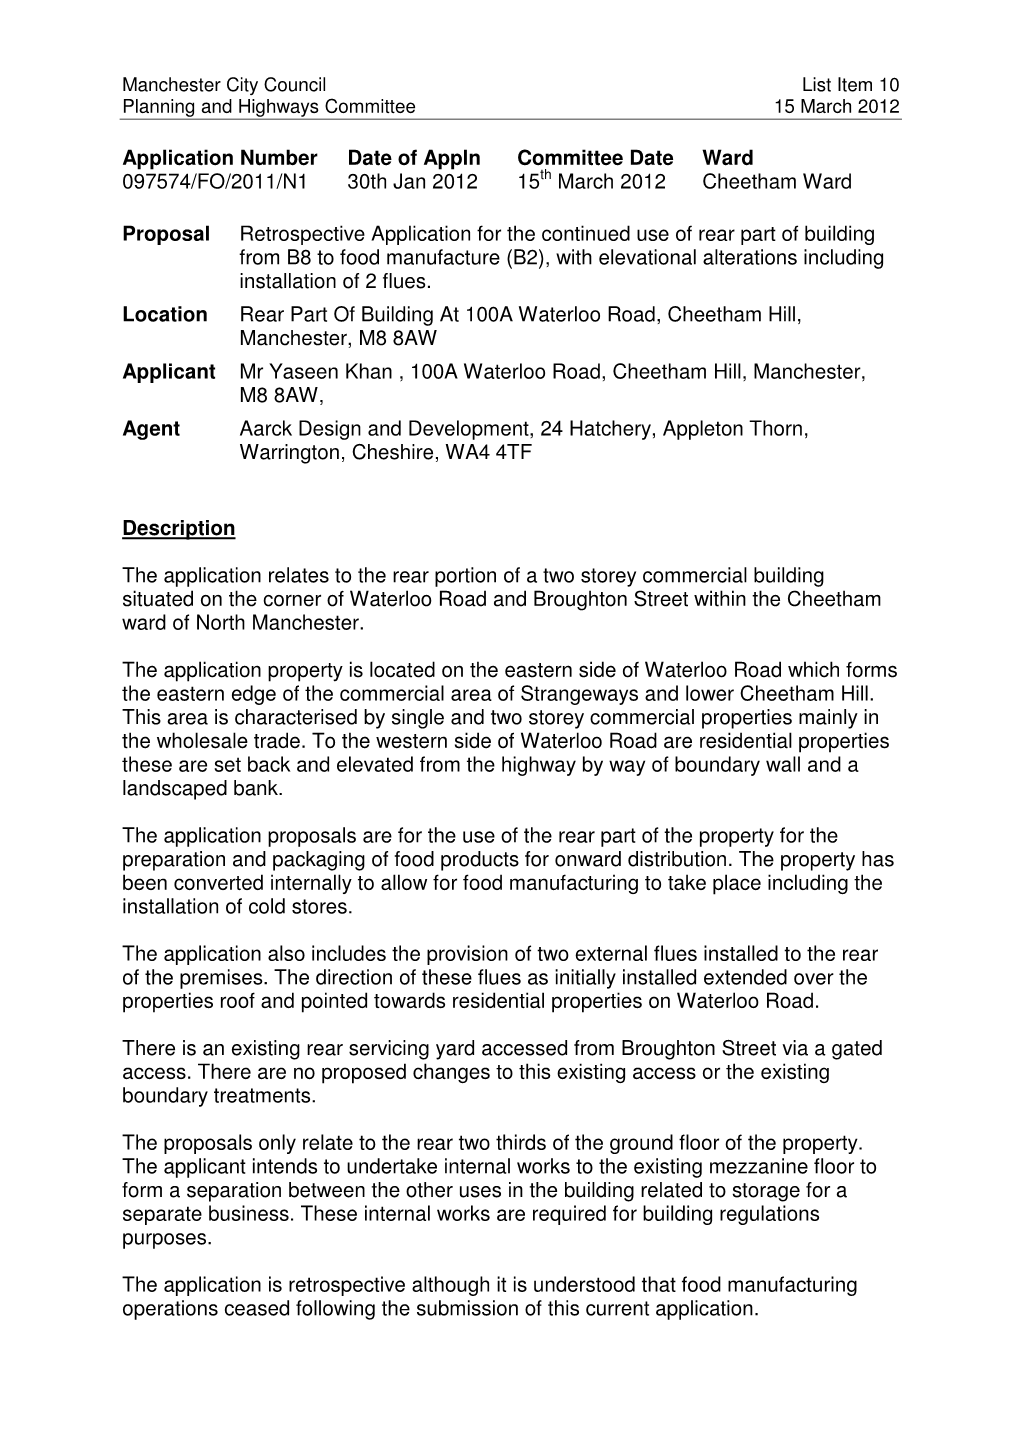 List Item 10 Planning and Highways Committee 15 March 2012